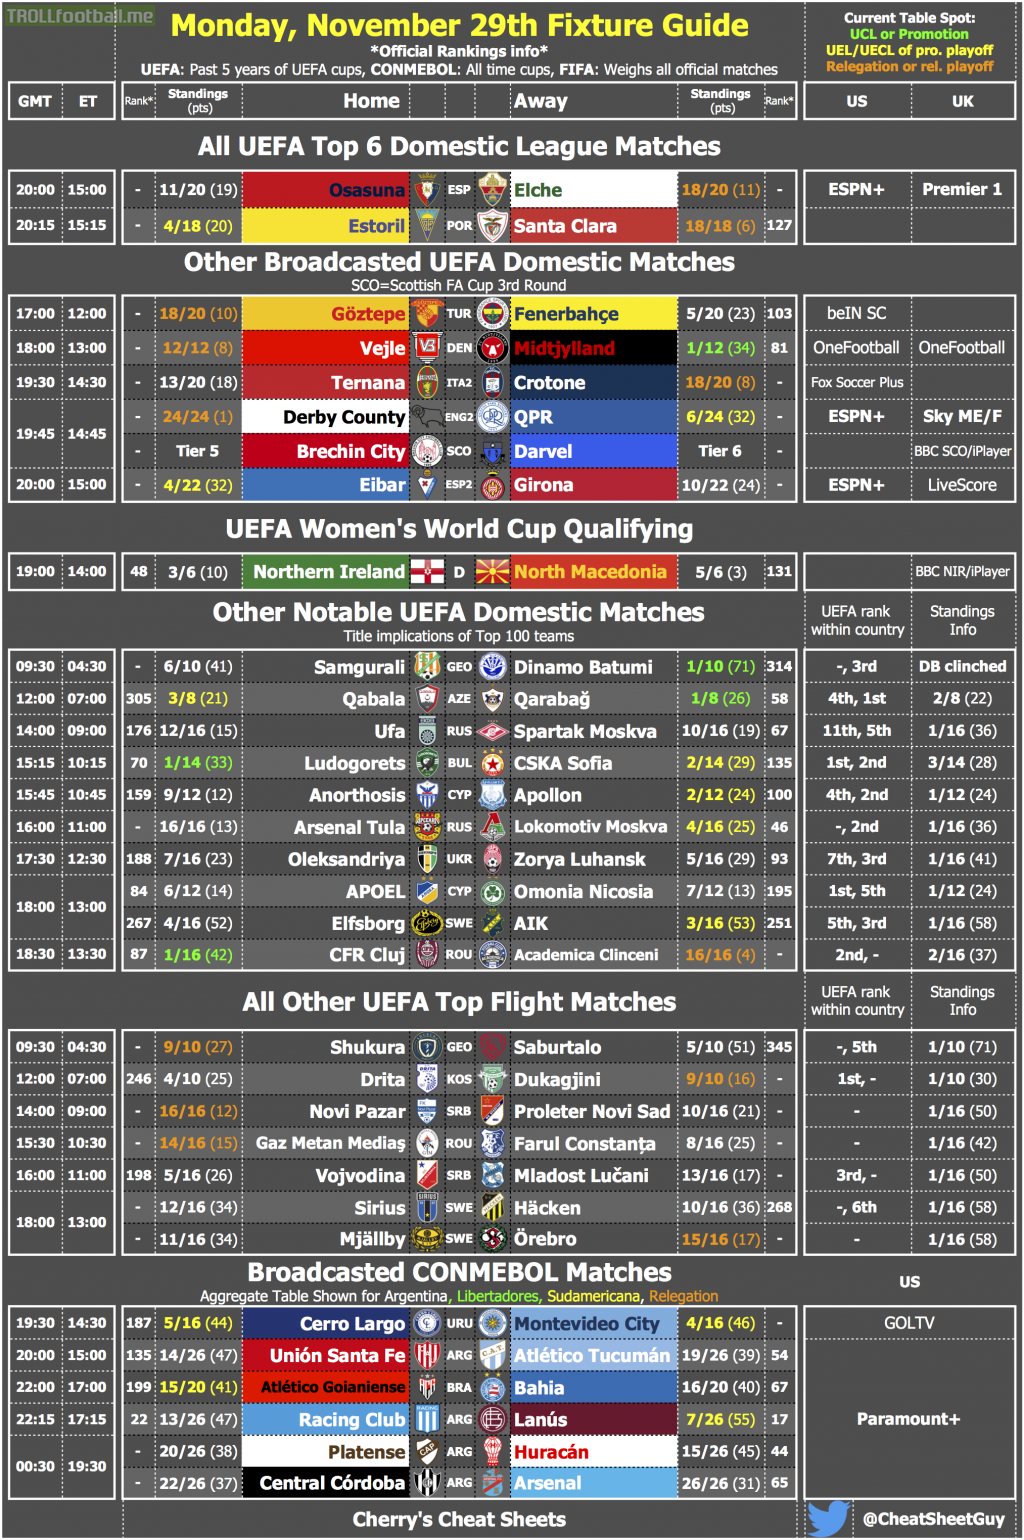 An Info & Broadcast Cheat Sheet for Monday's Fixtures